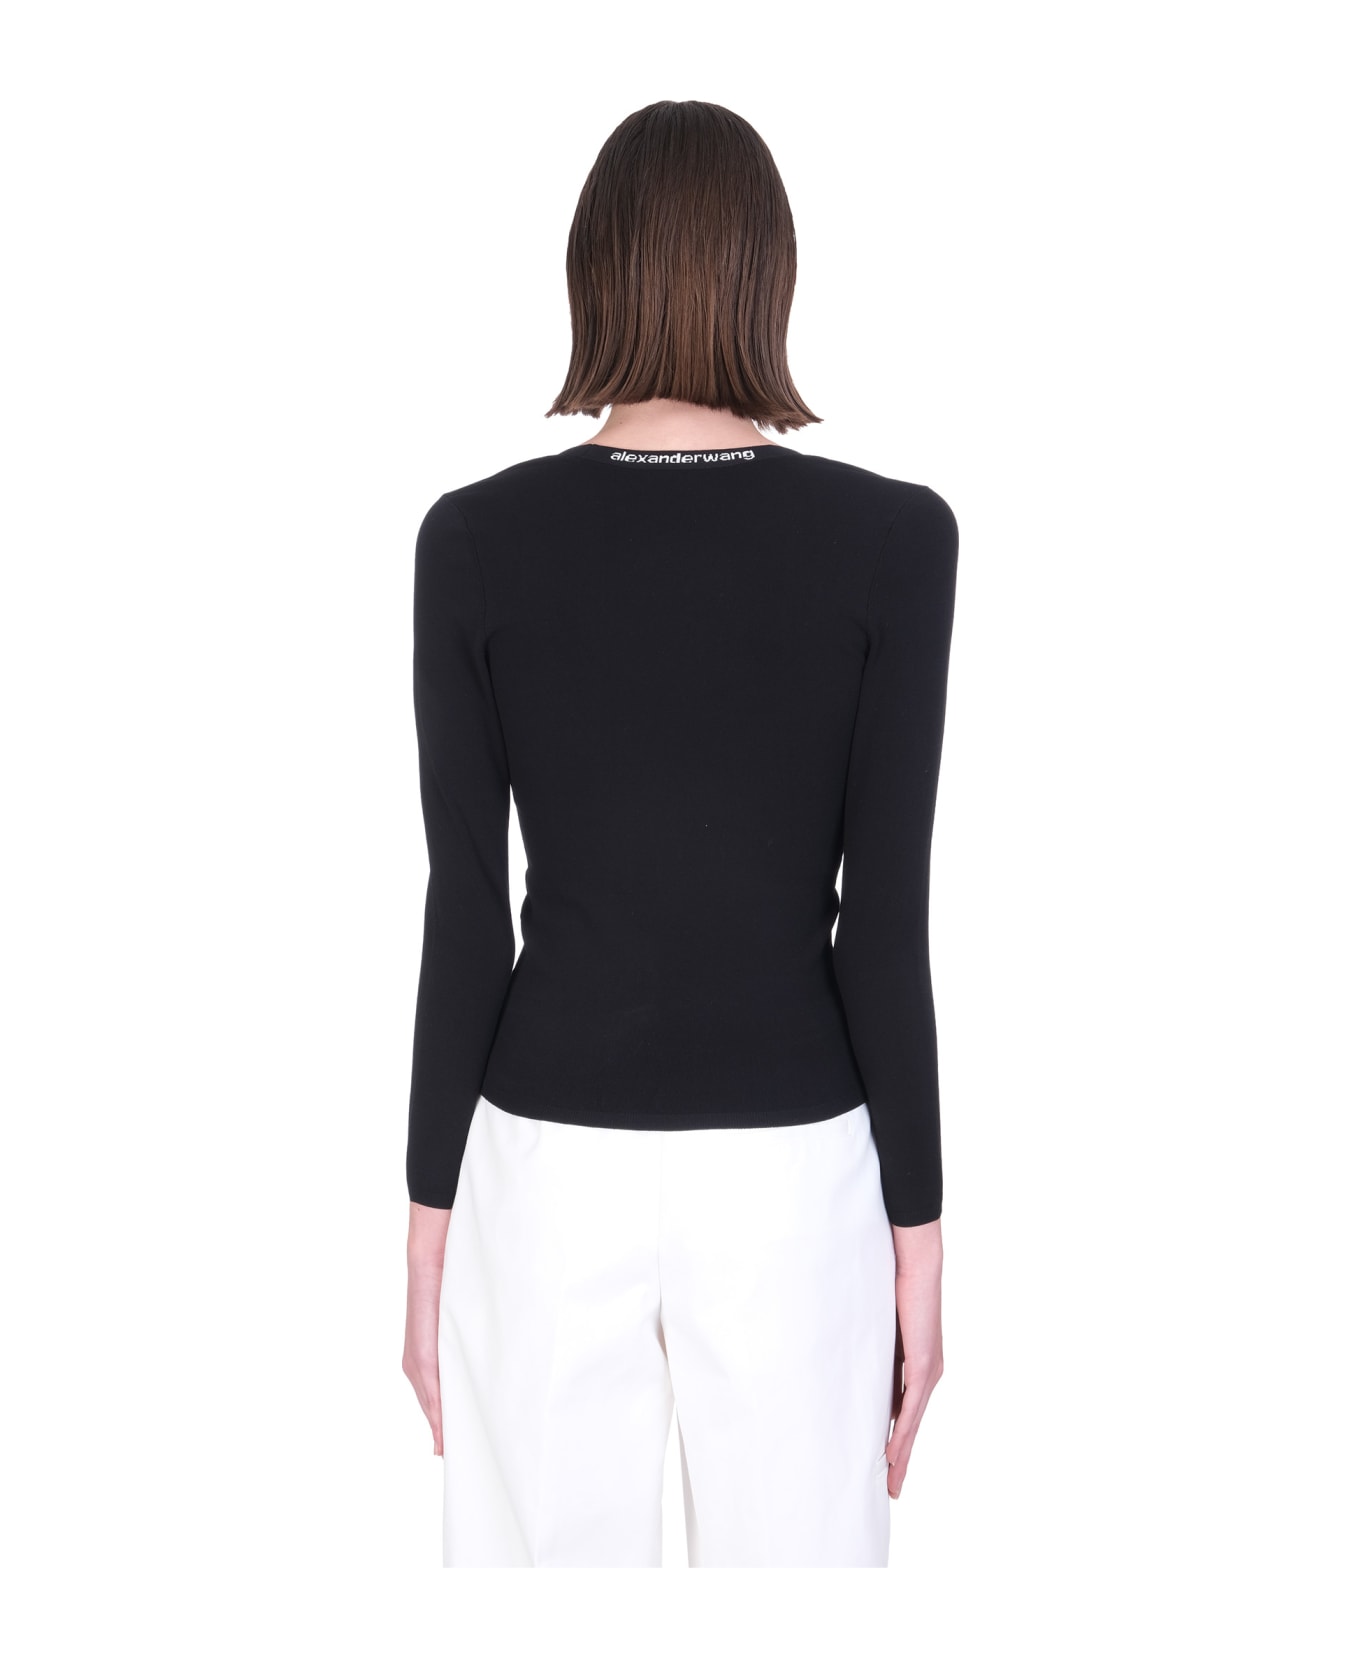 Alexander Wang Cotton Black Ribbed Sweater Womens Jumpers and knitwear Alexander Wang Jumpers and knitwear Save 20% 